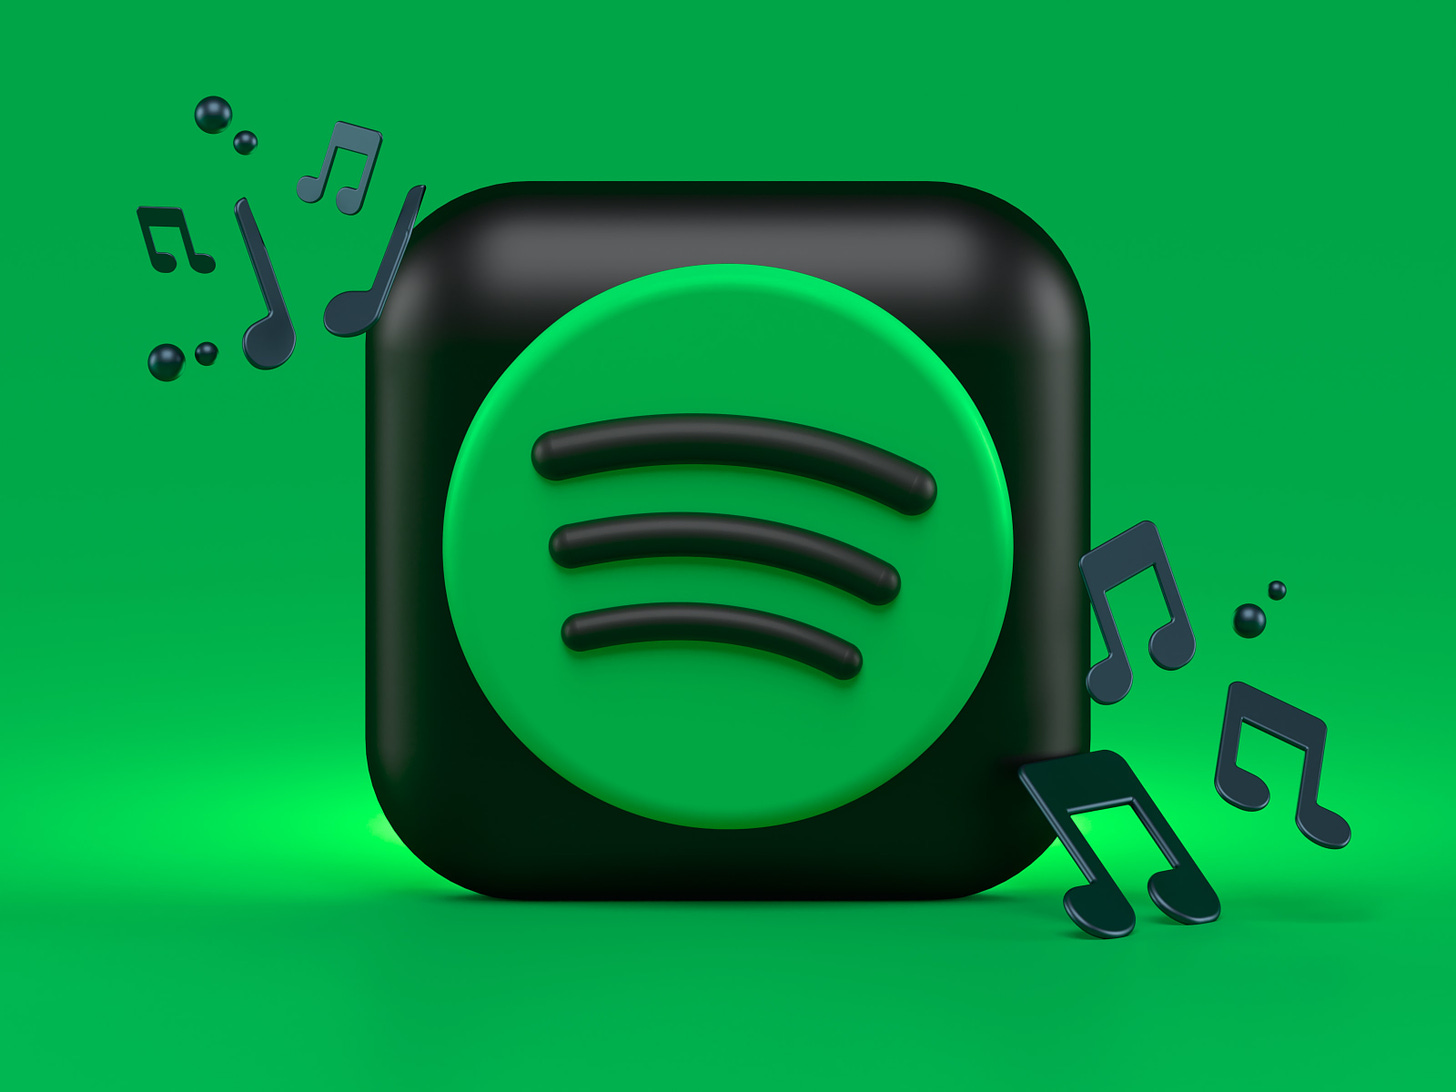 Spotify logo illustration with music notes coming out of it. (Alexander Shatov / Unsplash)